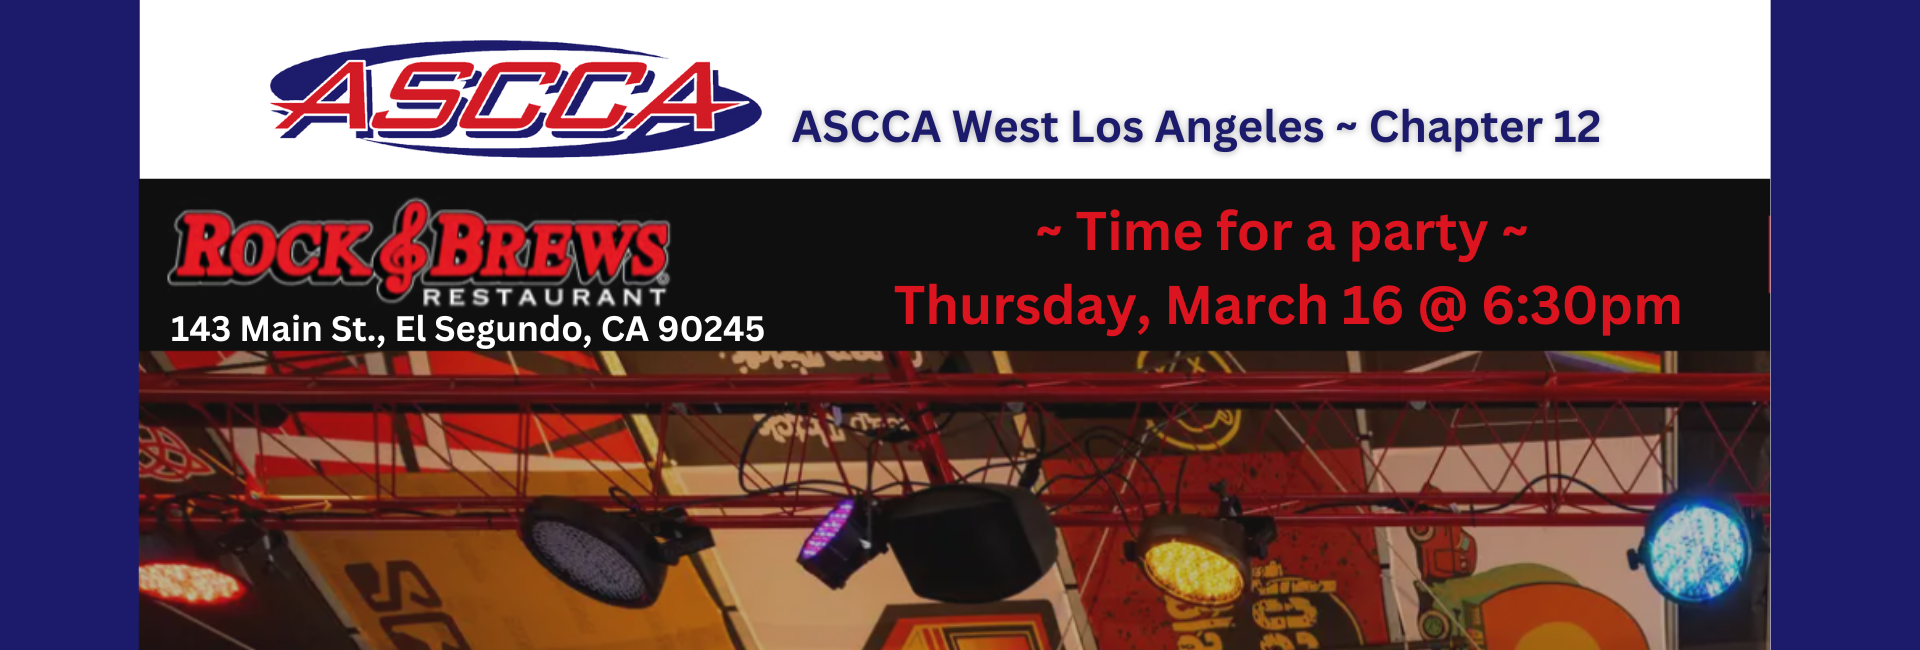 Join us at our next event on March 16 @ 6:39 PM, Rock & Brews, El Segundo